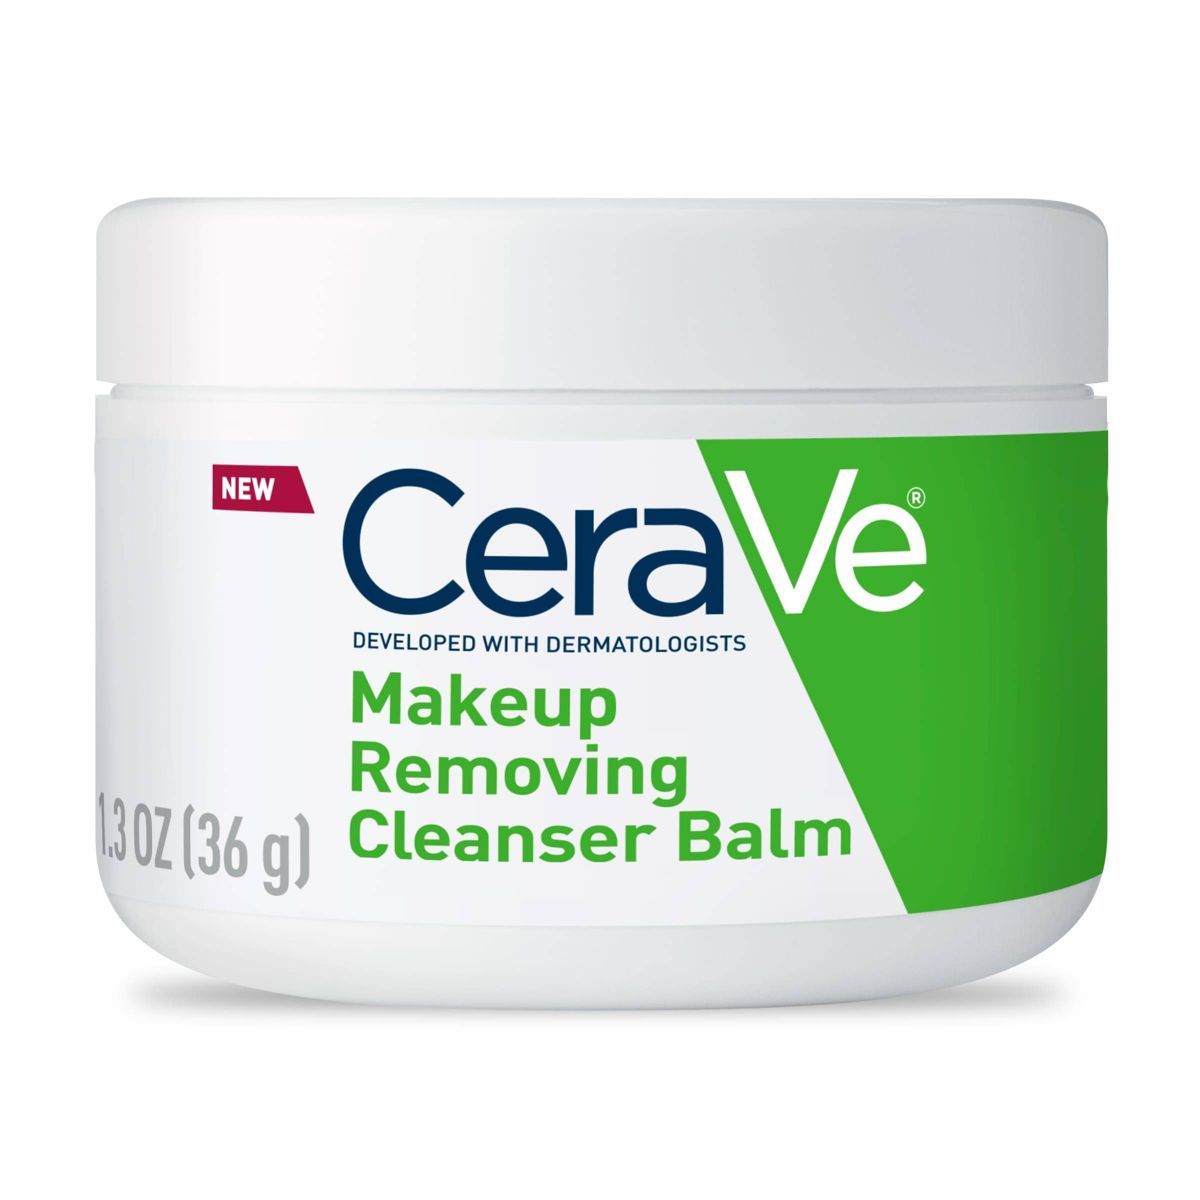 CeraVe Hydrating Makeup Cleansing Balm, Travel Size - Unscented - 1.3 oz | Target